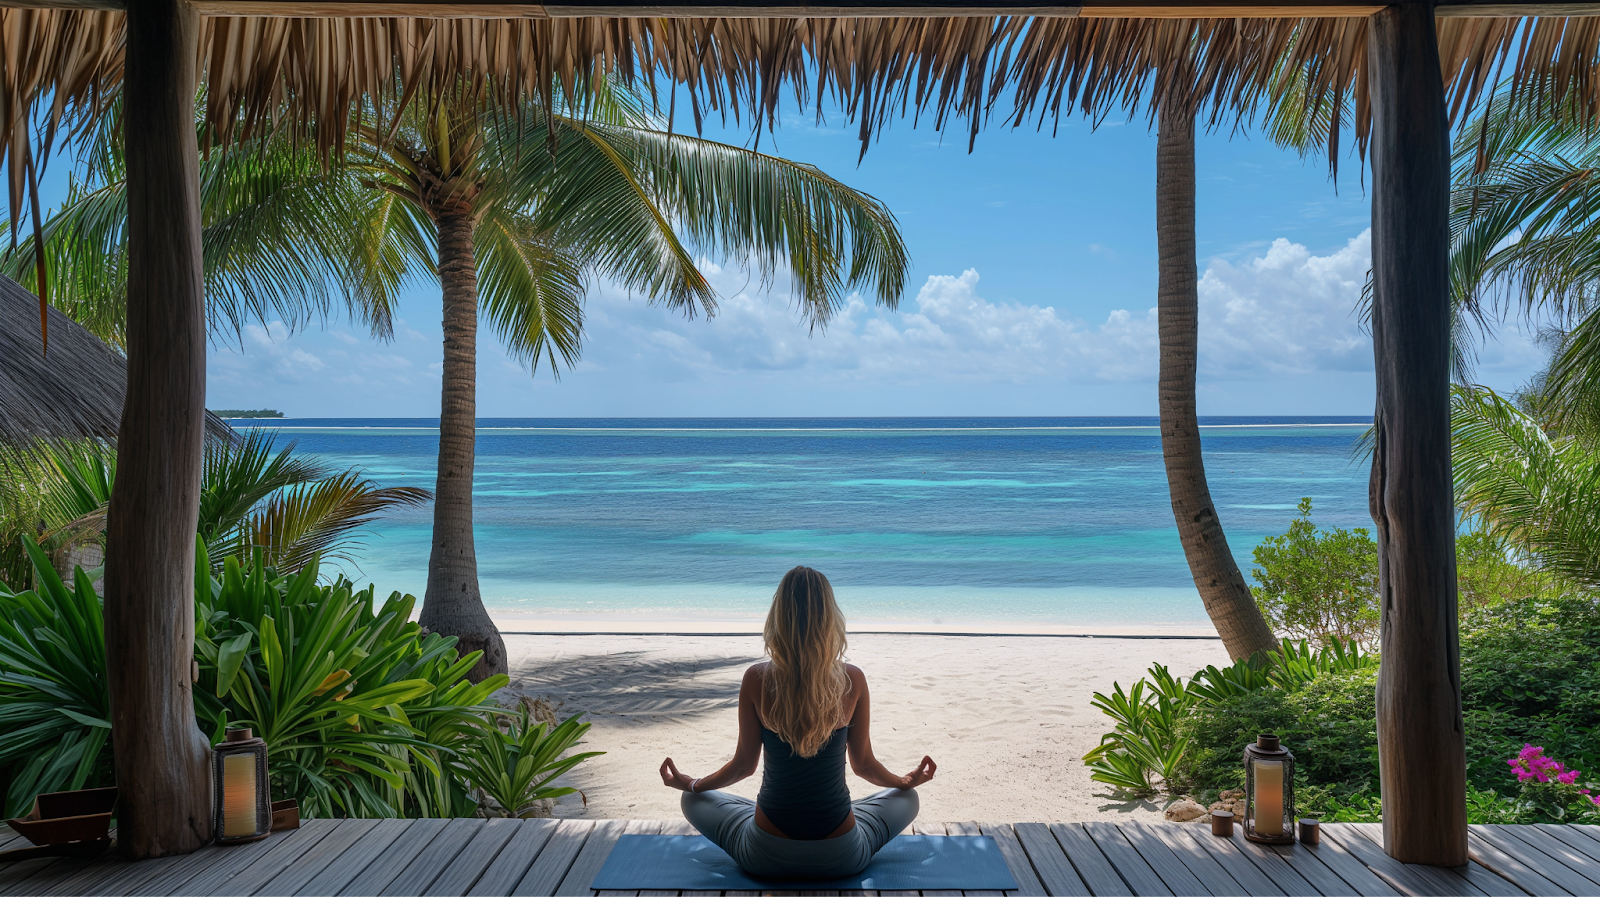 A woman on a yoga session at her beachfront vacation rental in the Maldives